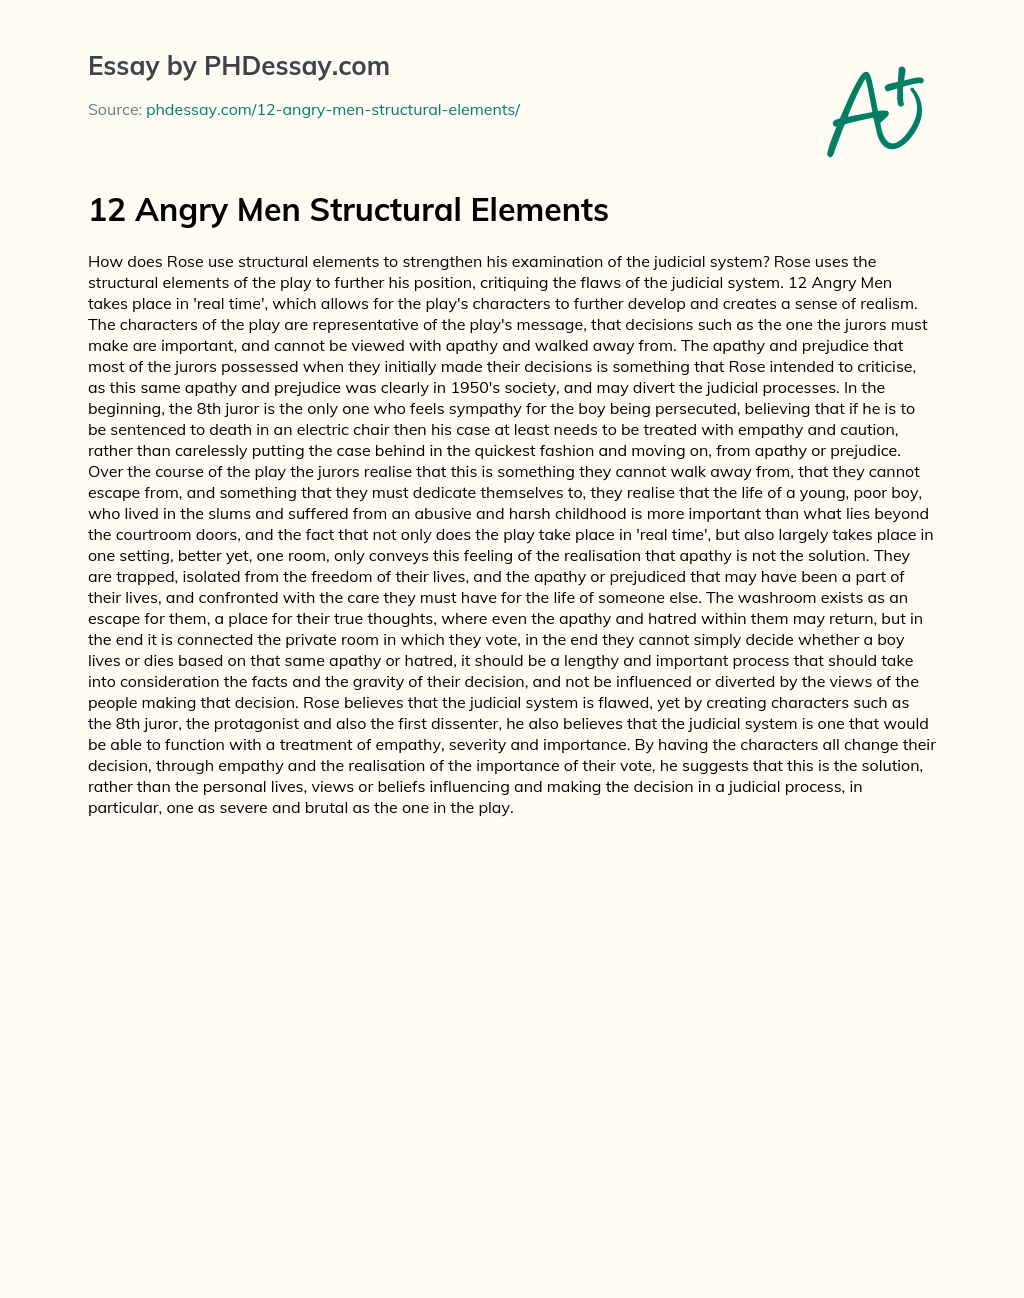 12 Angry Men Structural Elements essay